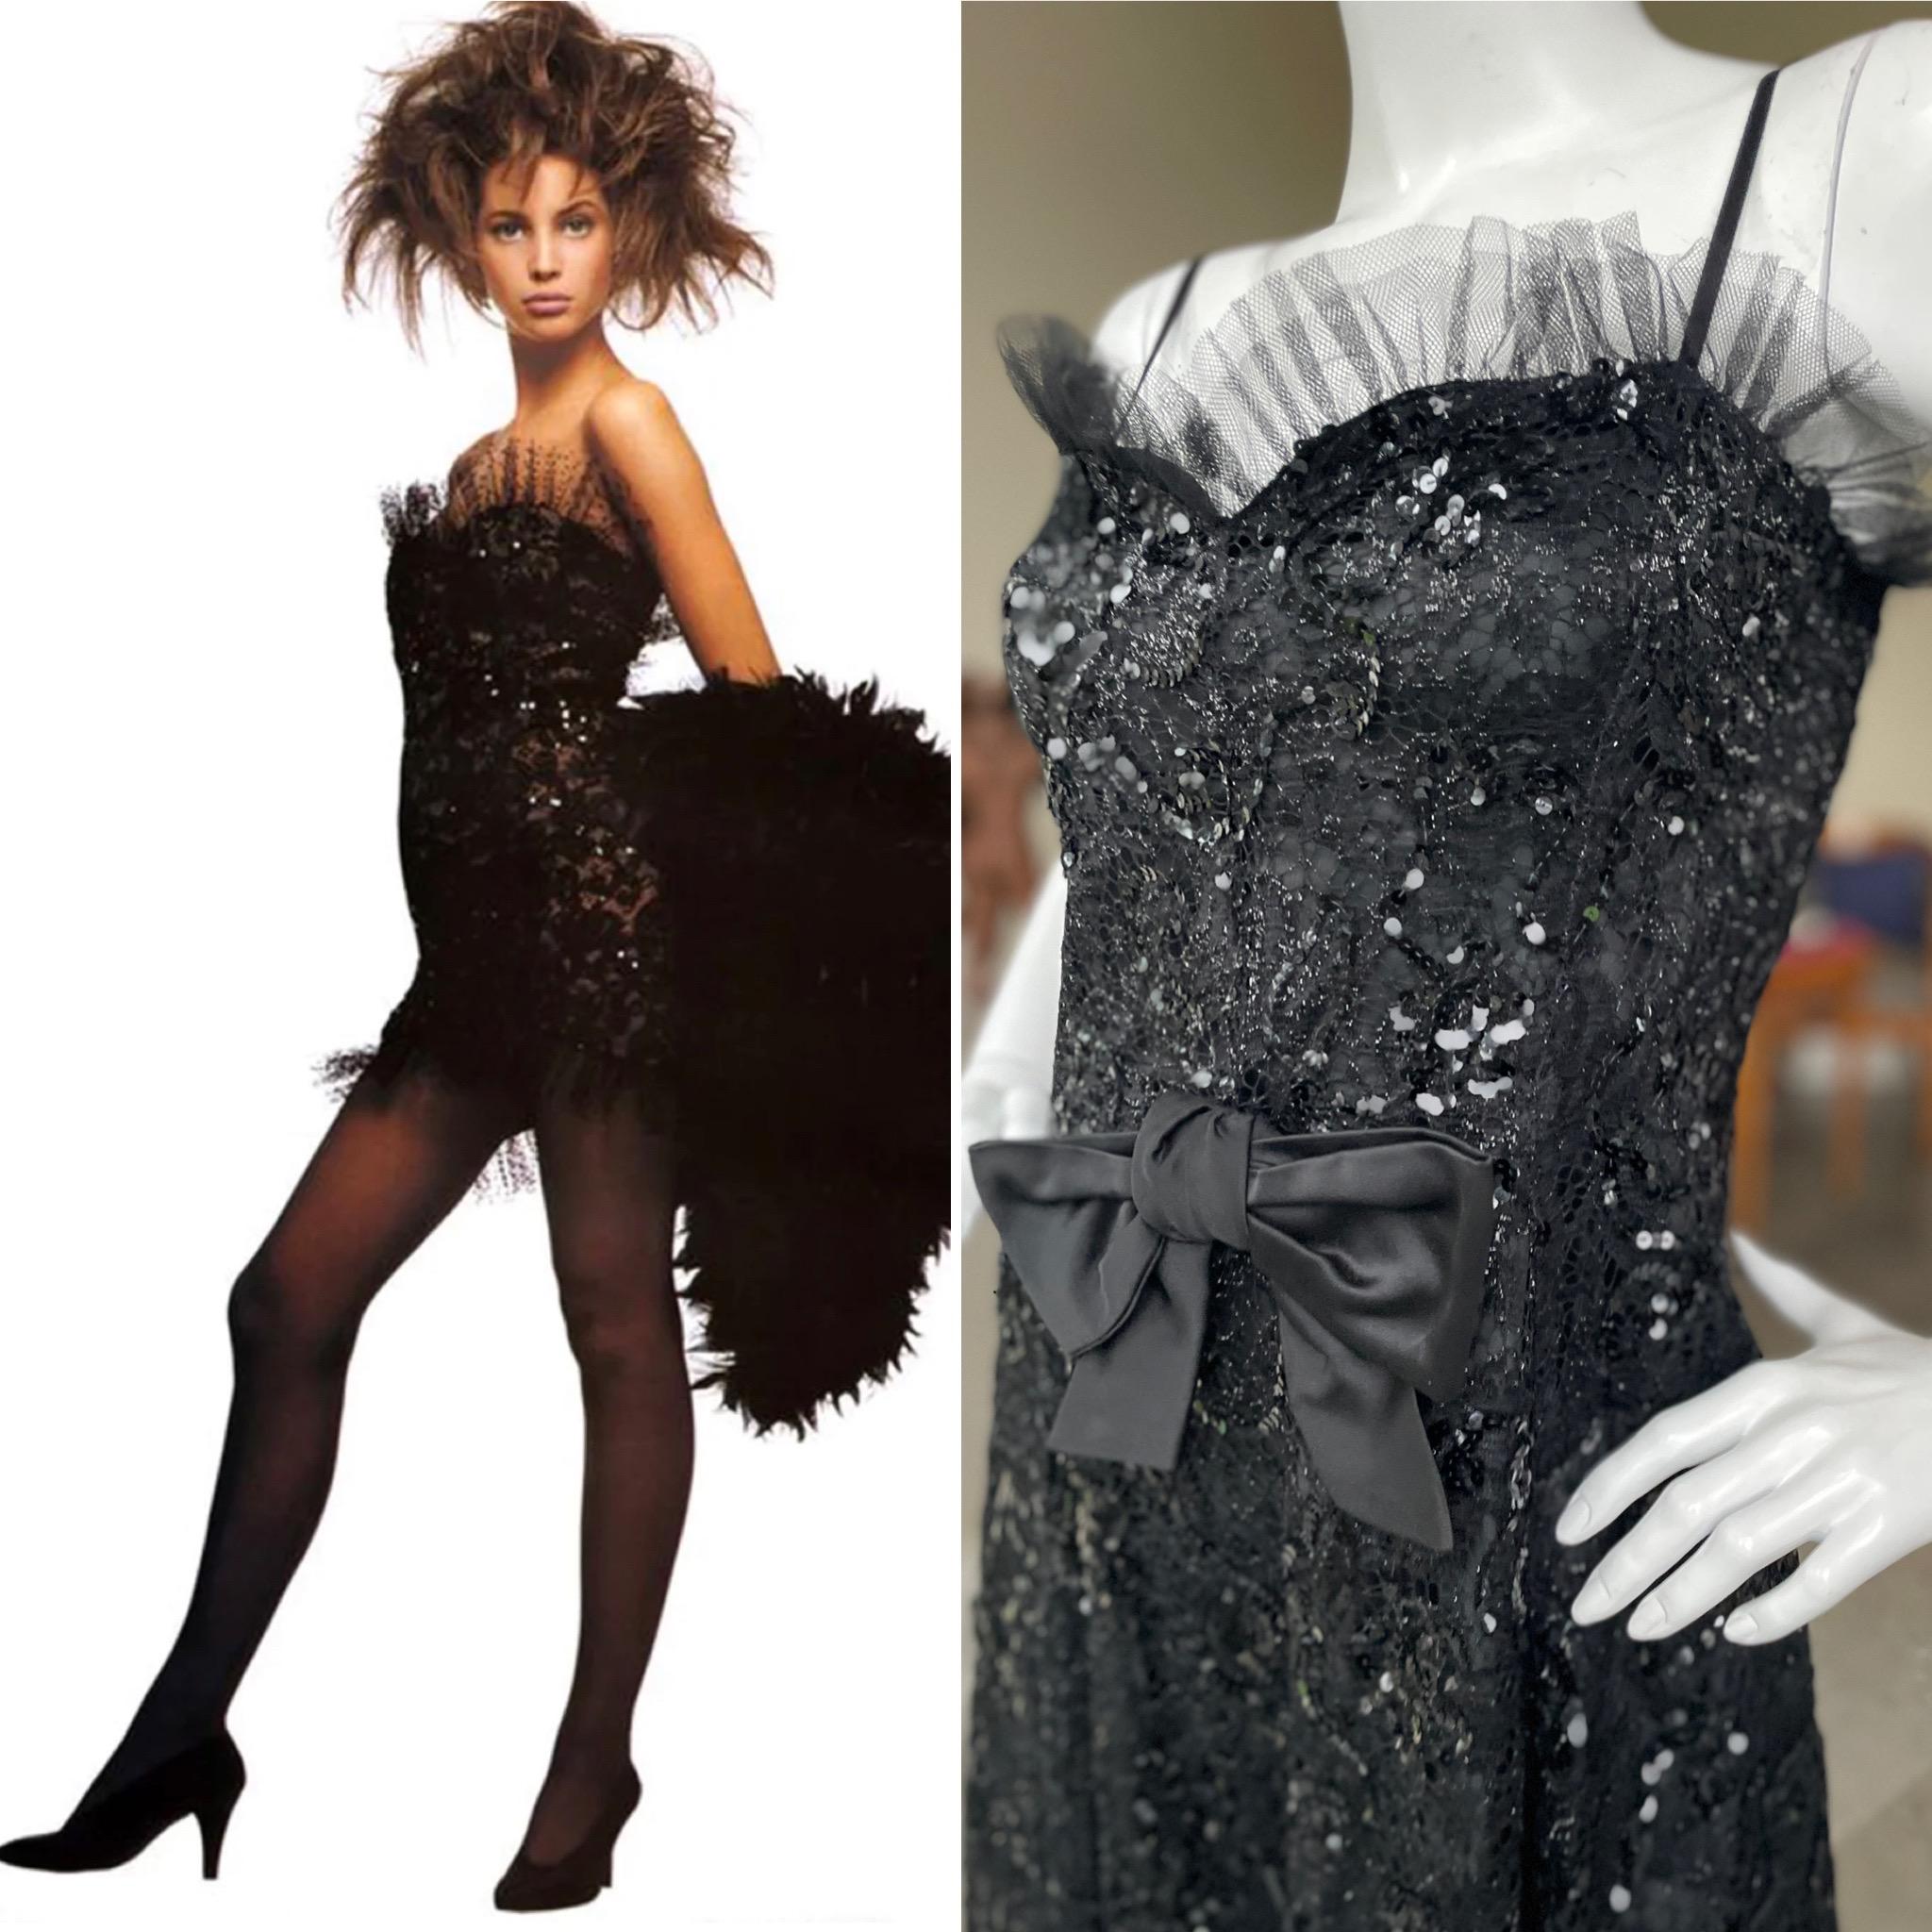 Yves Saint Laurent Rive Gauche Ad Campaign Fall 1987 Sequin Lace Cocktail Dress.
As shown on Naomi Campbell and Christy Turlington in the ads.
  This is so pretty, it is much sexier than the photos show. 
  Size 38
Bust 34